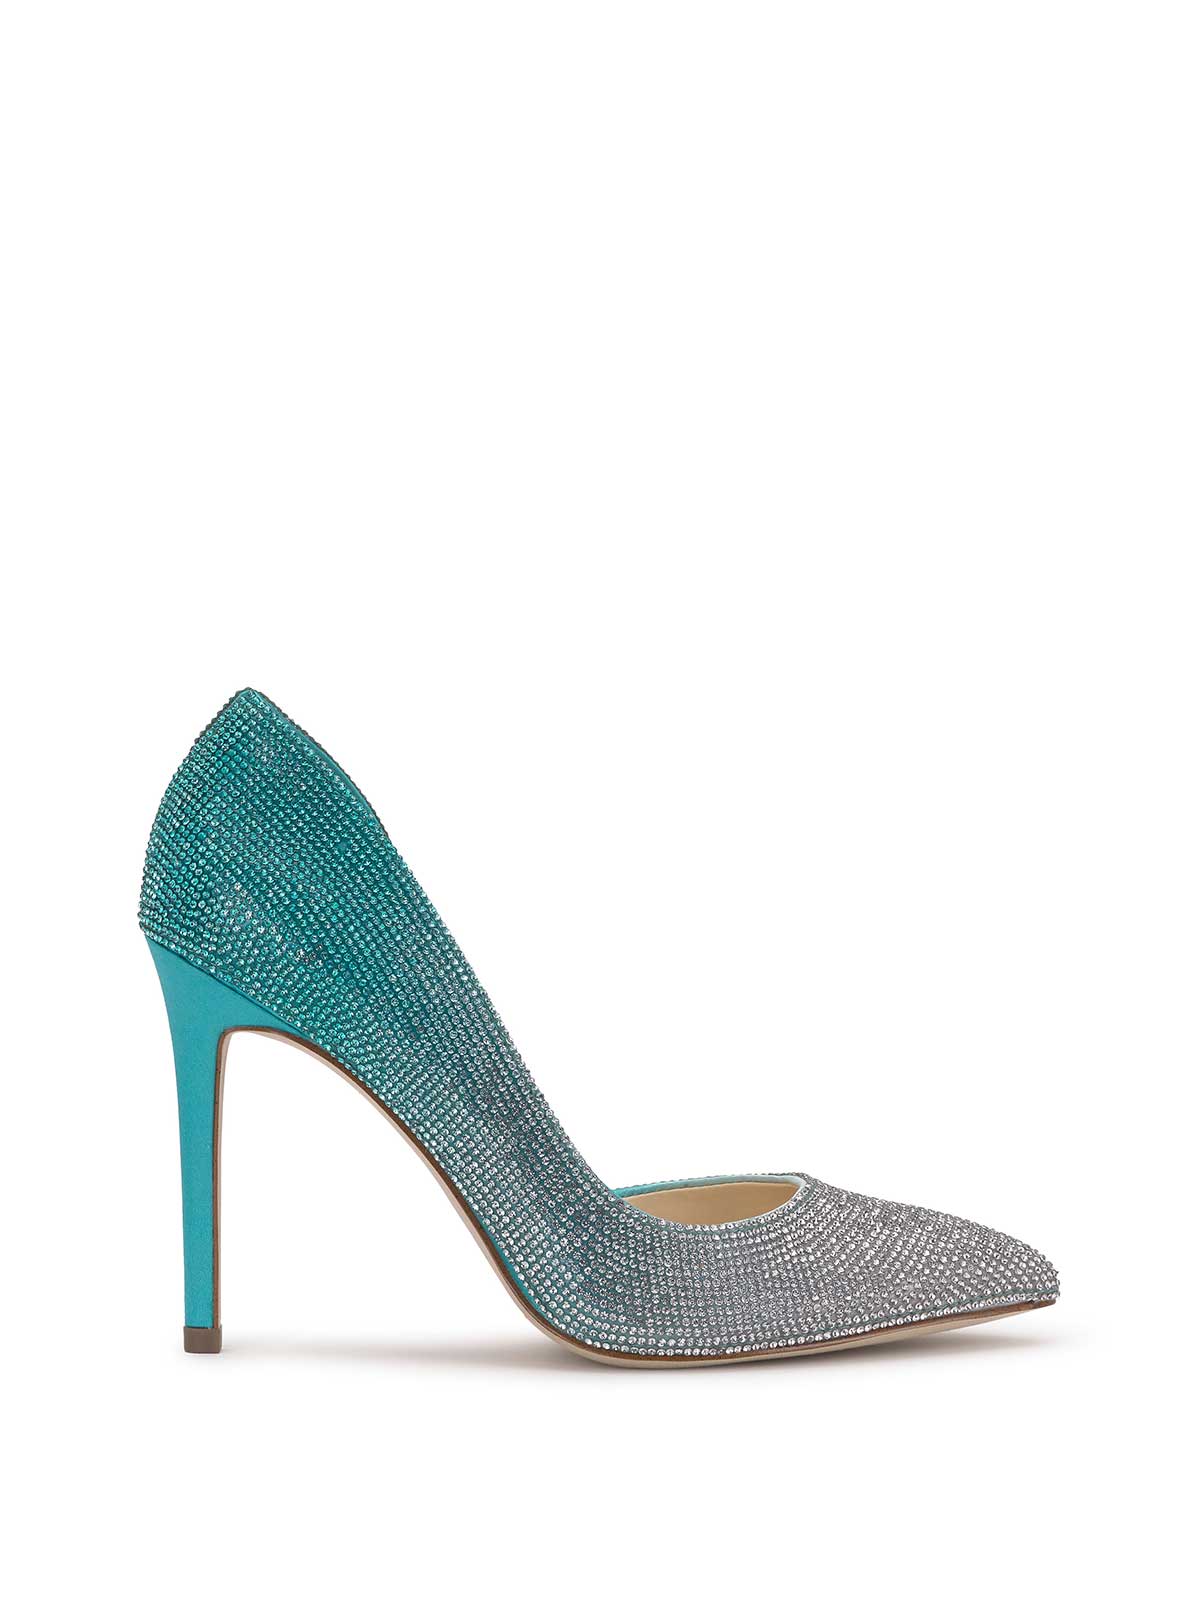 Image of Prizma D'Orsay Pump in Green Ombre